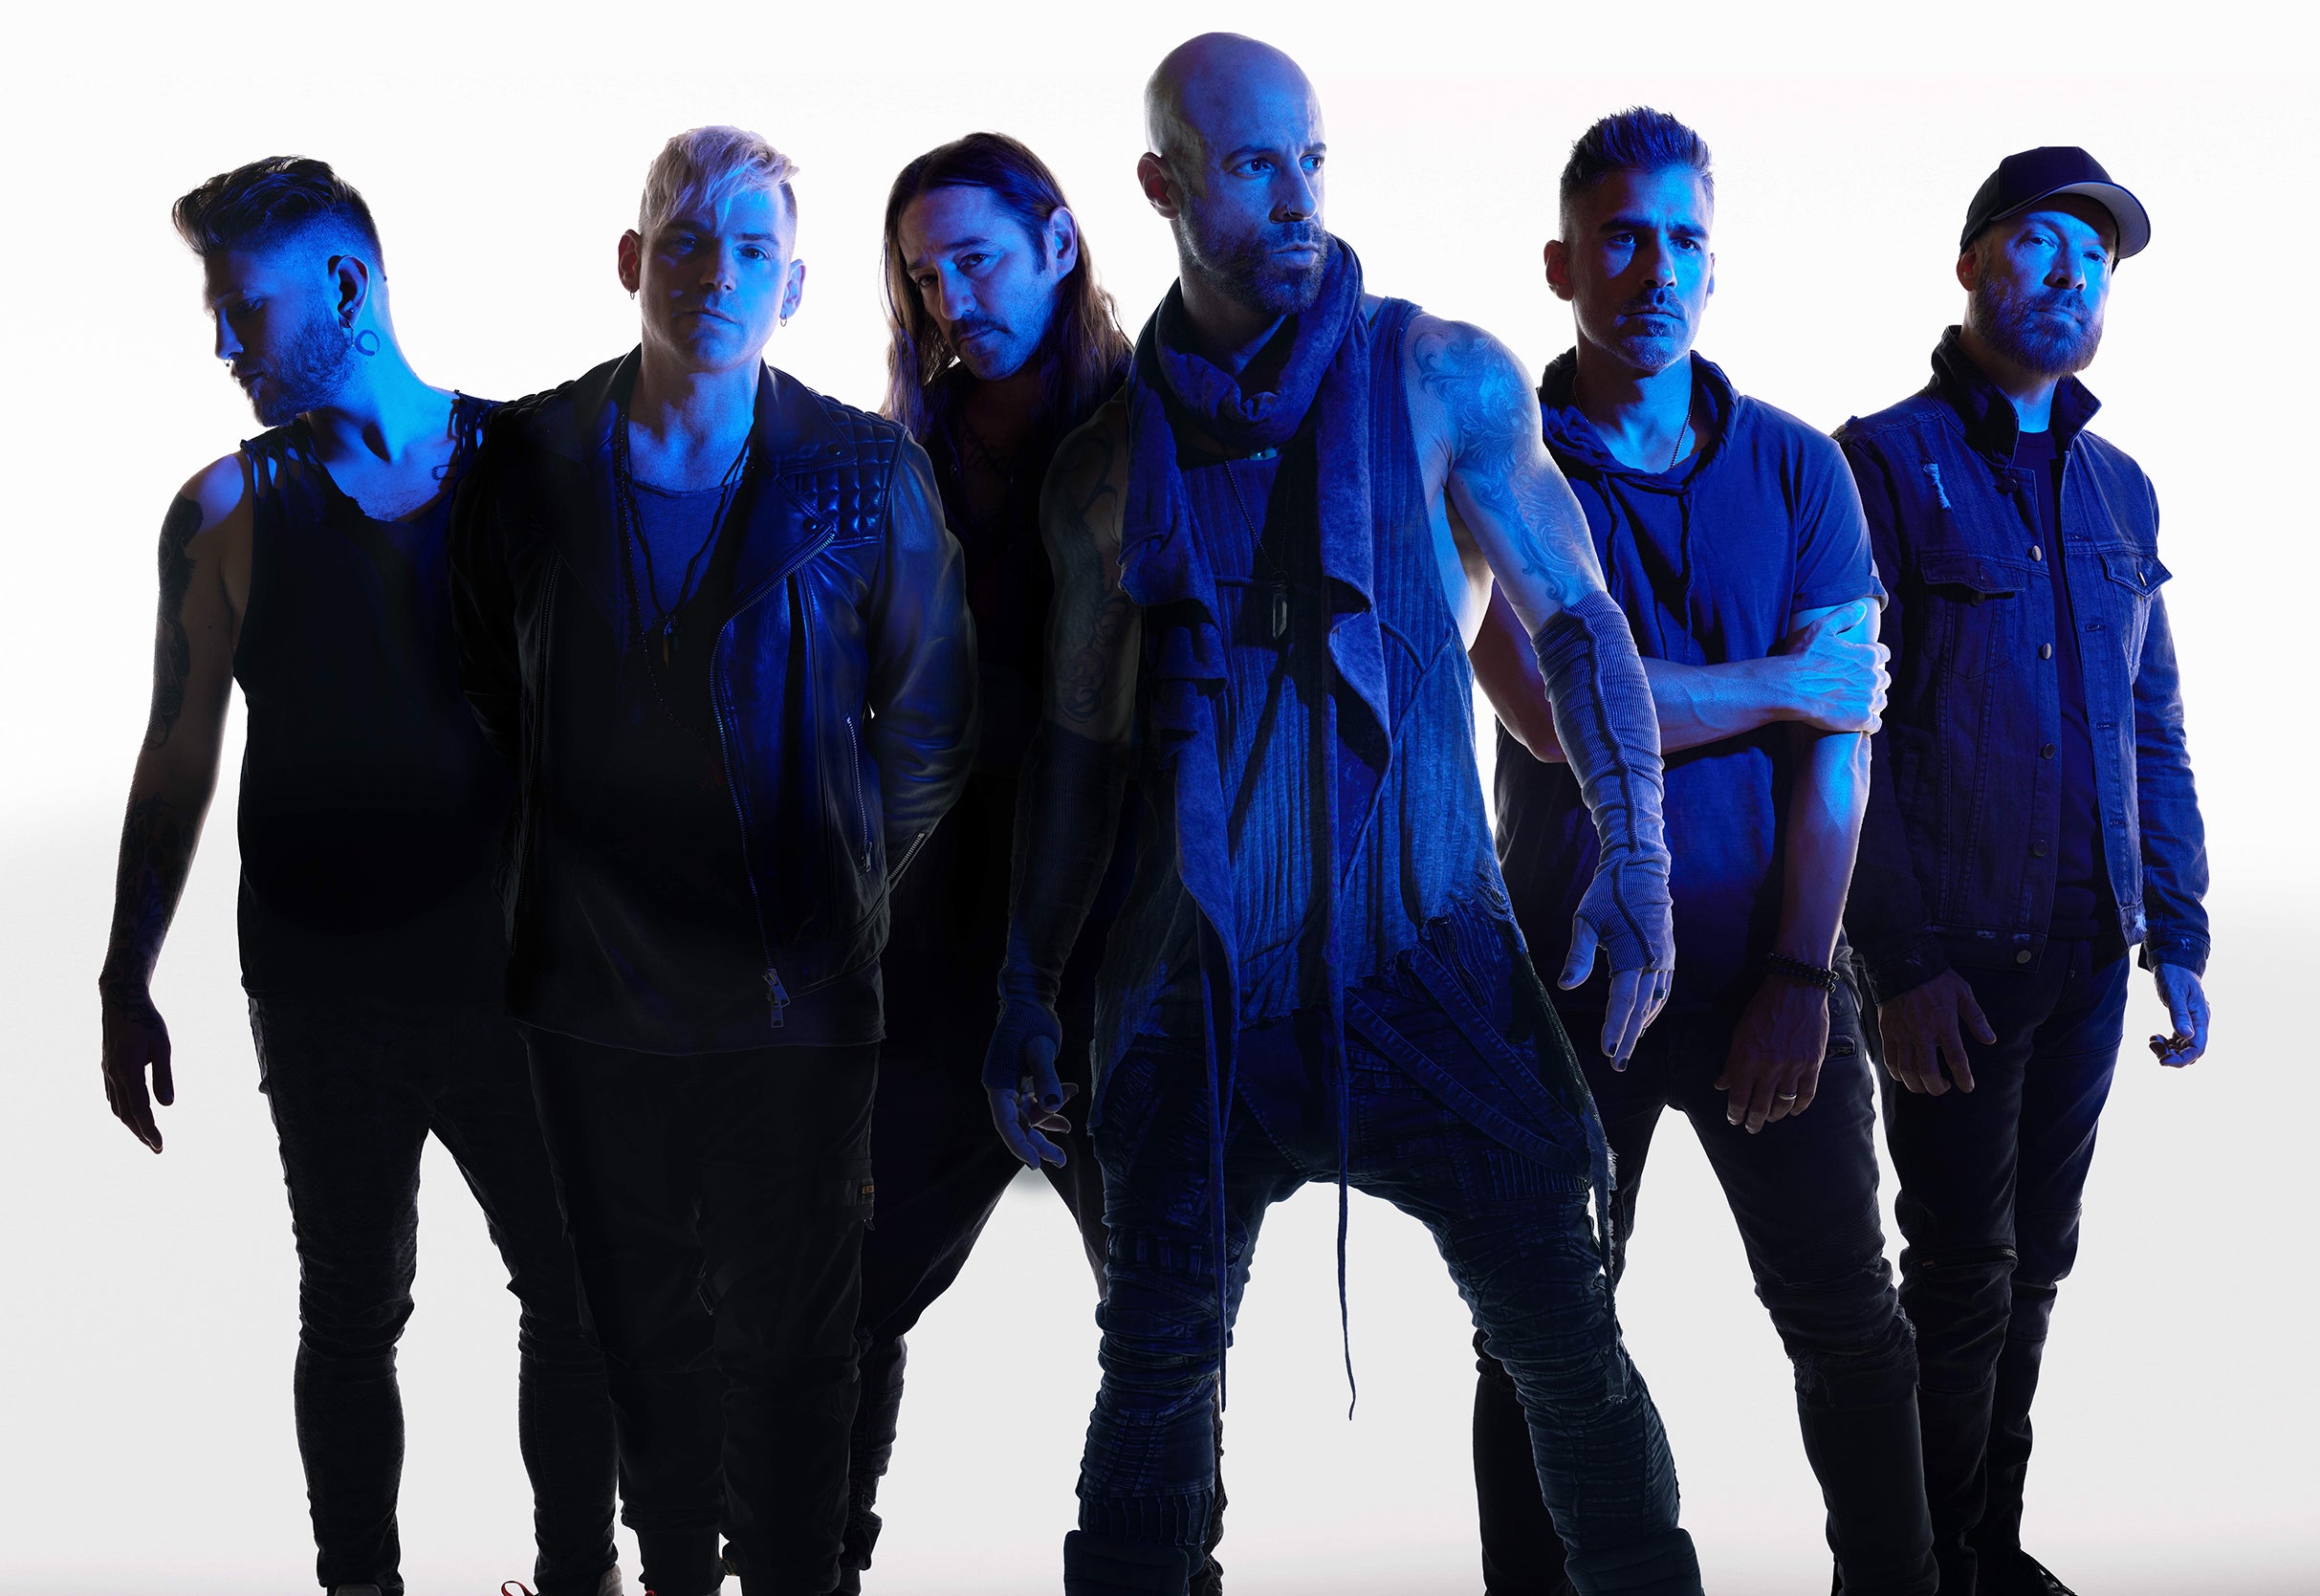 Daughtry with Scott Stapp: The Voice Of Creed in Lincoln promo photo for Daughtry App presale offer code